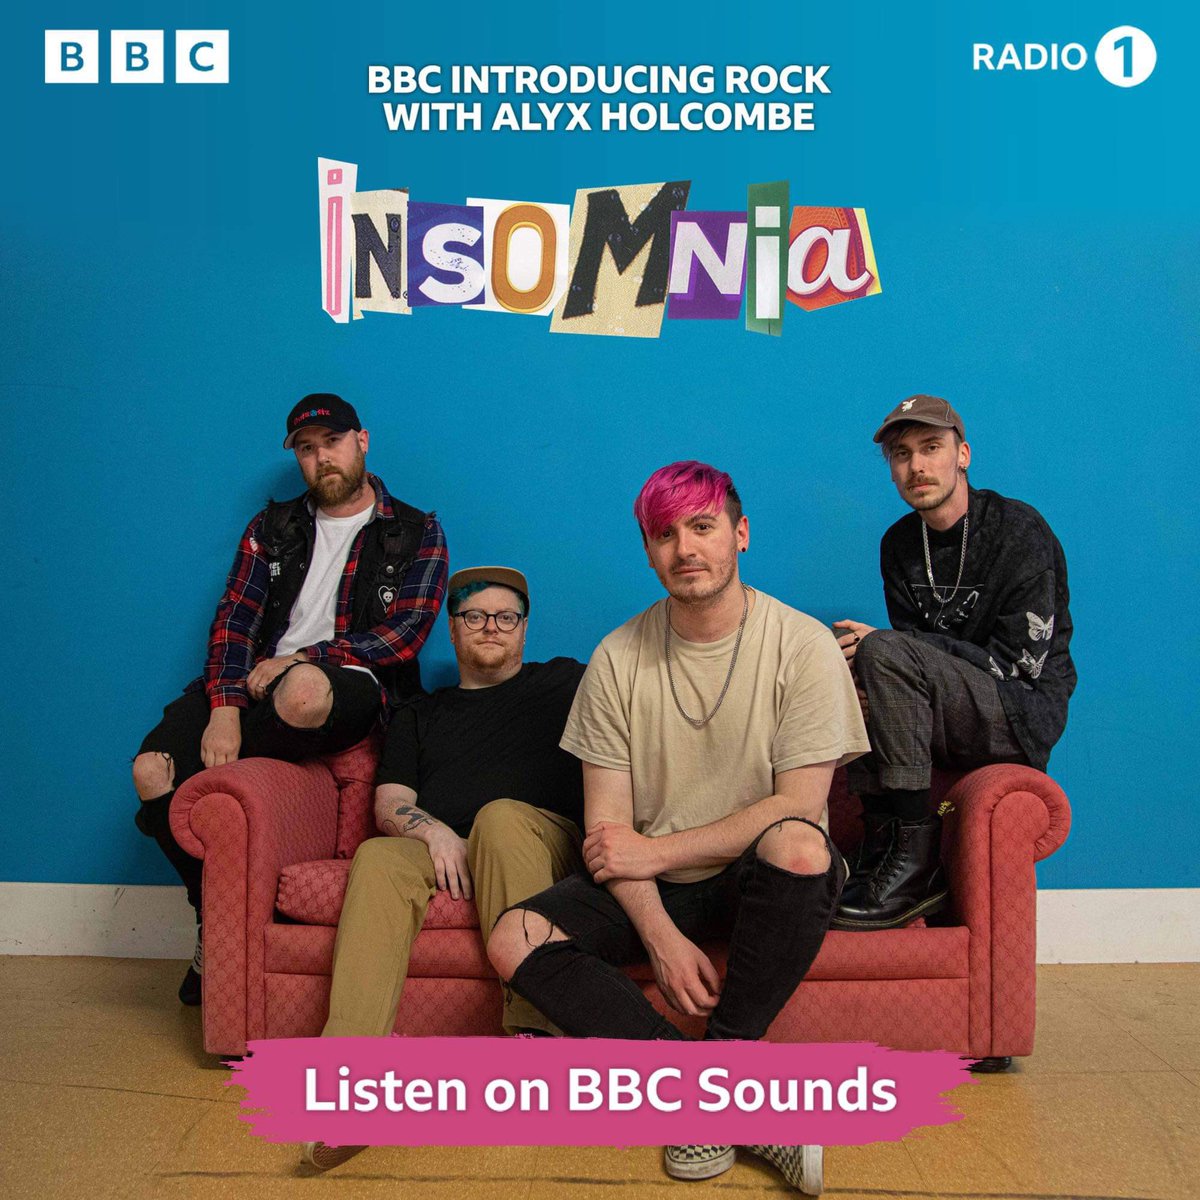 Ayo!! Tune into @BBCR1 tonight (or morning) and catch our new track Insomnia on @bbcintroducing Rock with @AlyxHolcombe! 🤘🏻 bbc.co.uk/sounds/play/li…